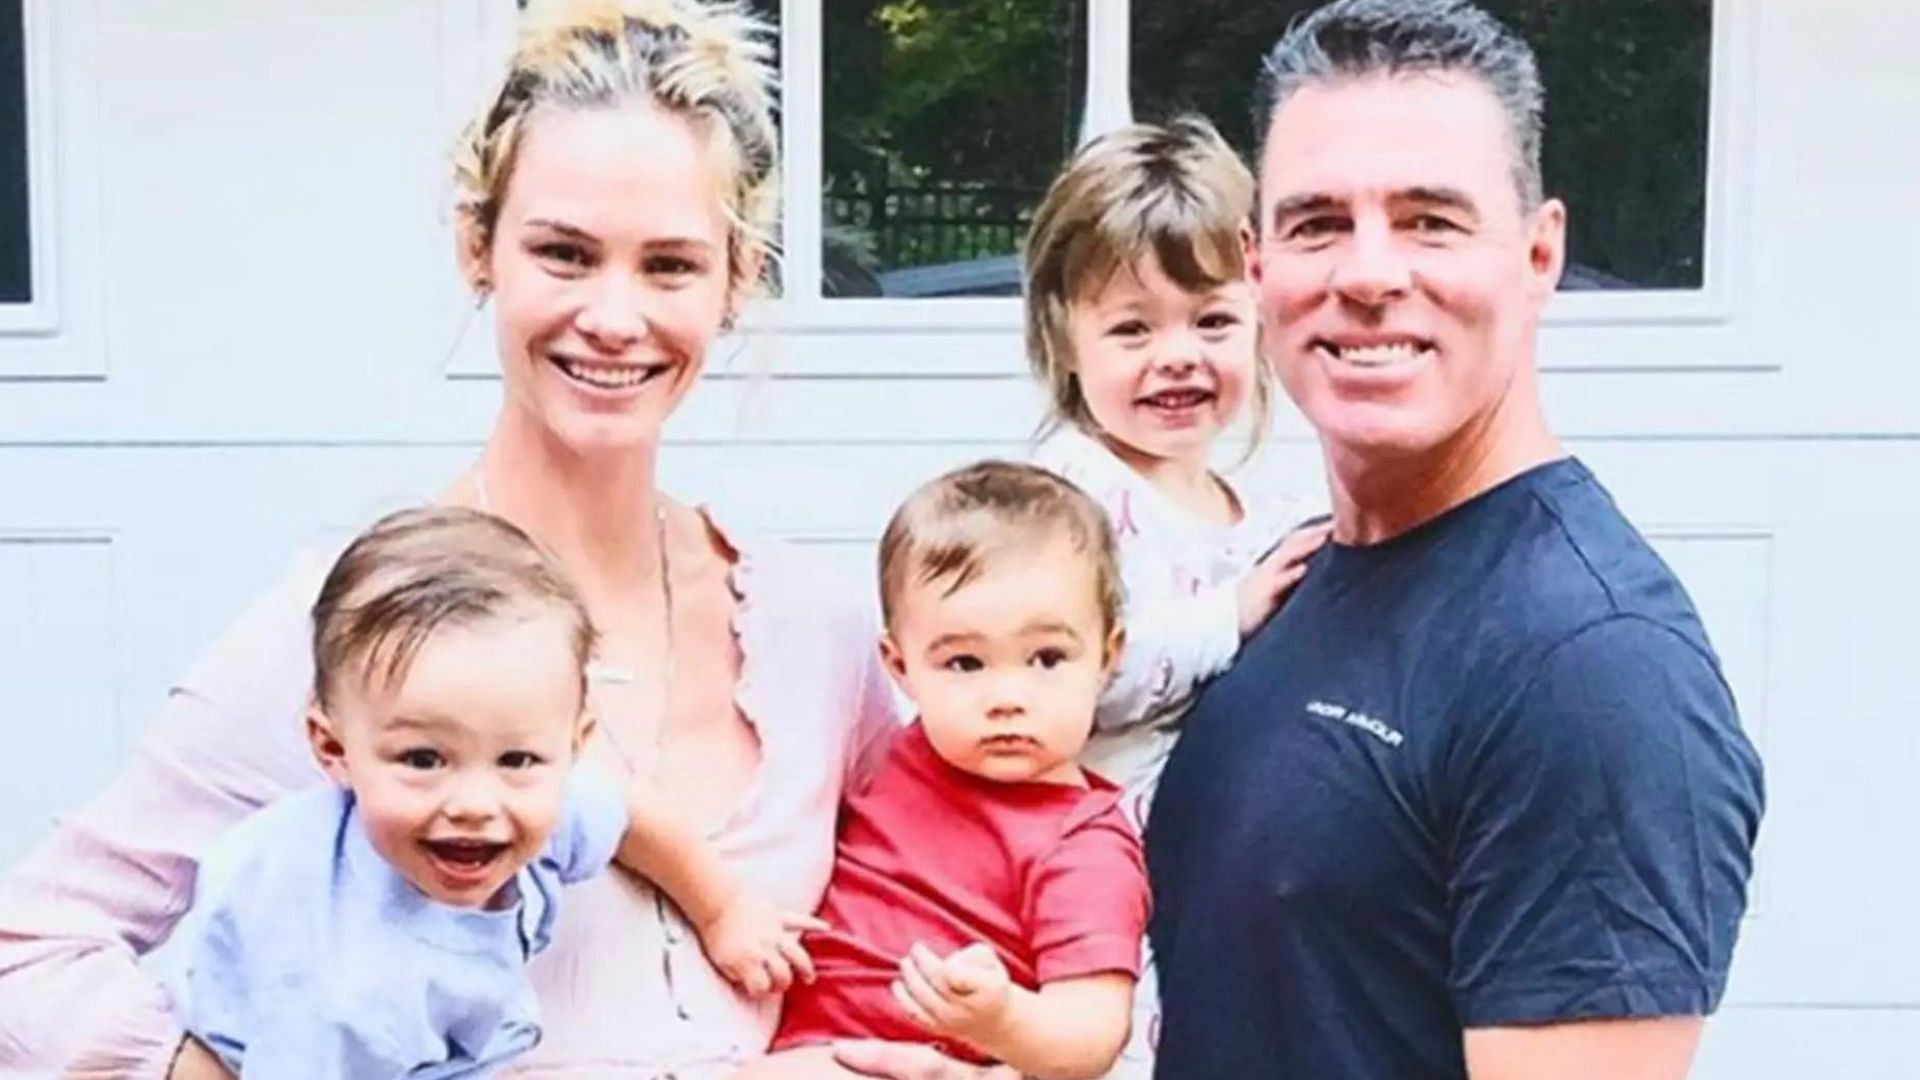 I'm sorry, this is very cringe - Retired MLB star Jim Edmonds' ex-wife  Meghan King brutally dissects former husband's wedding invitation